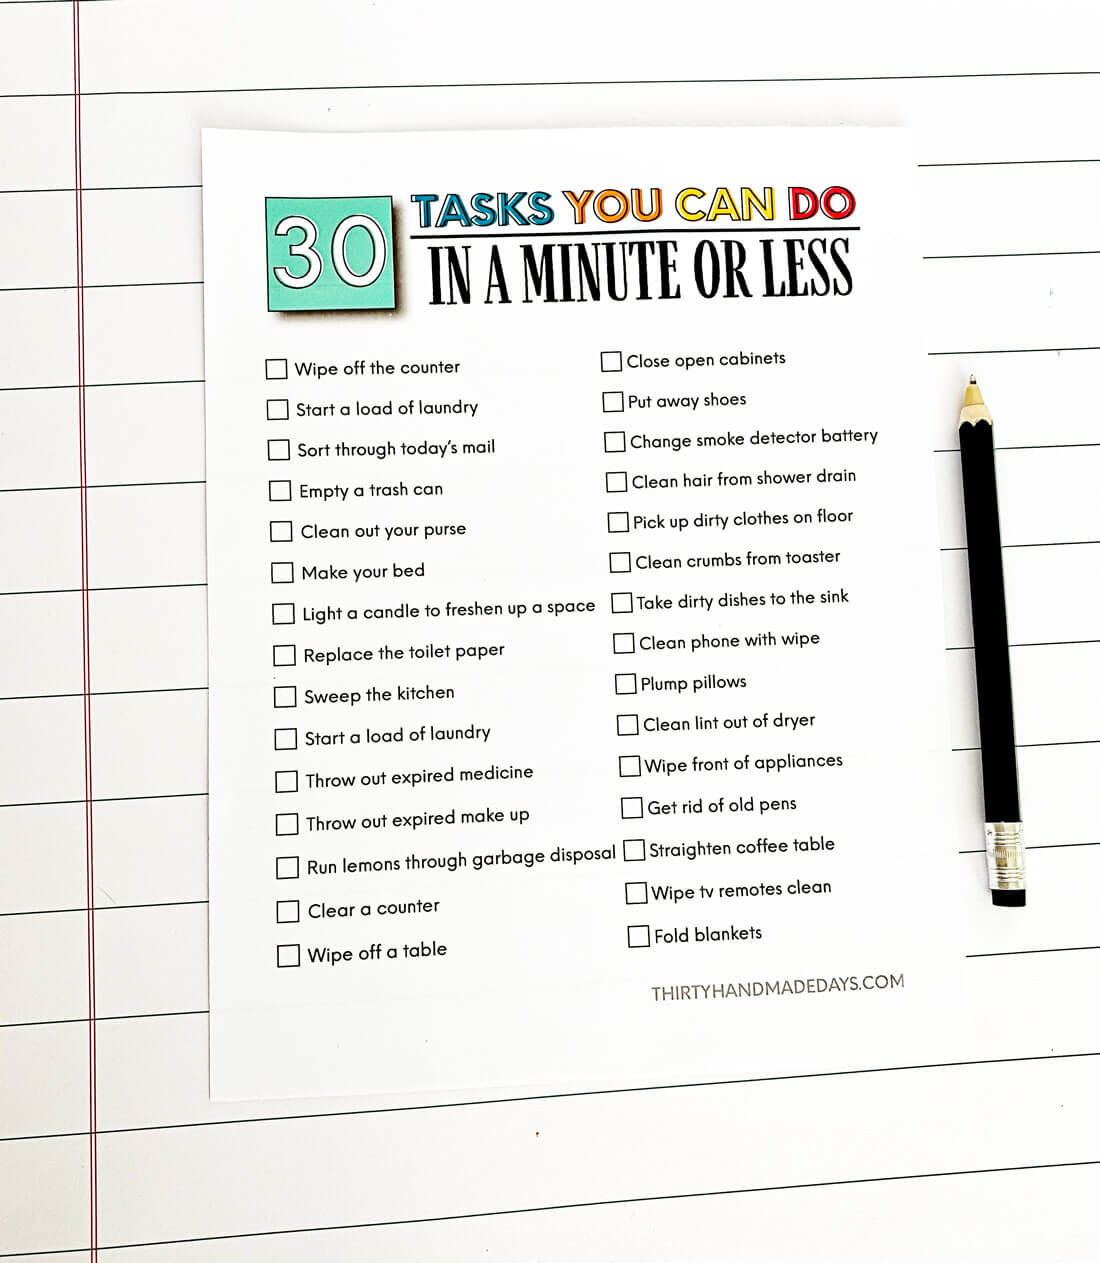 Printable task list to tackle in one minute or less